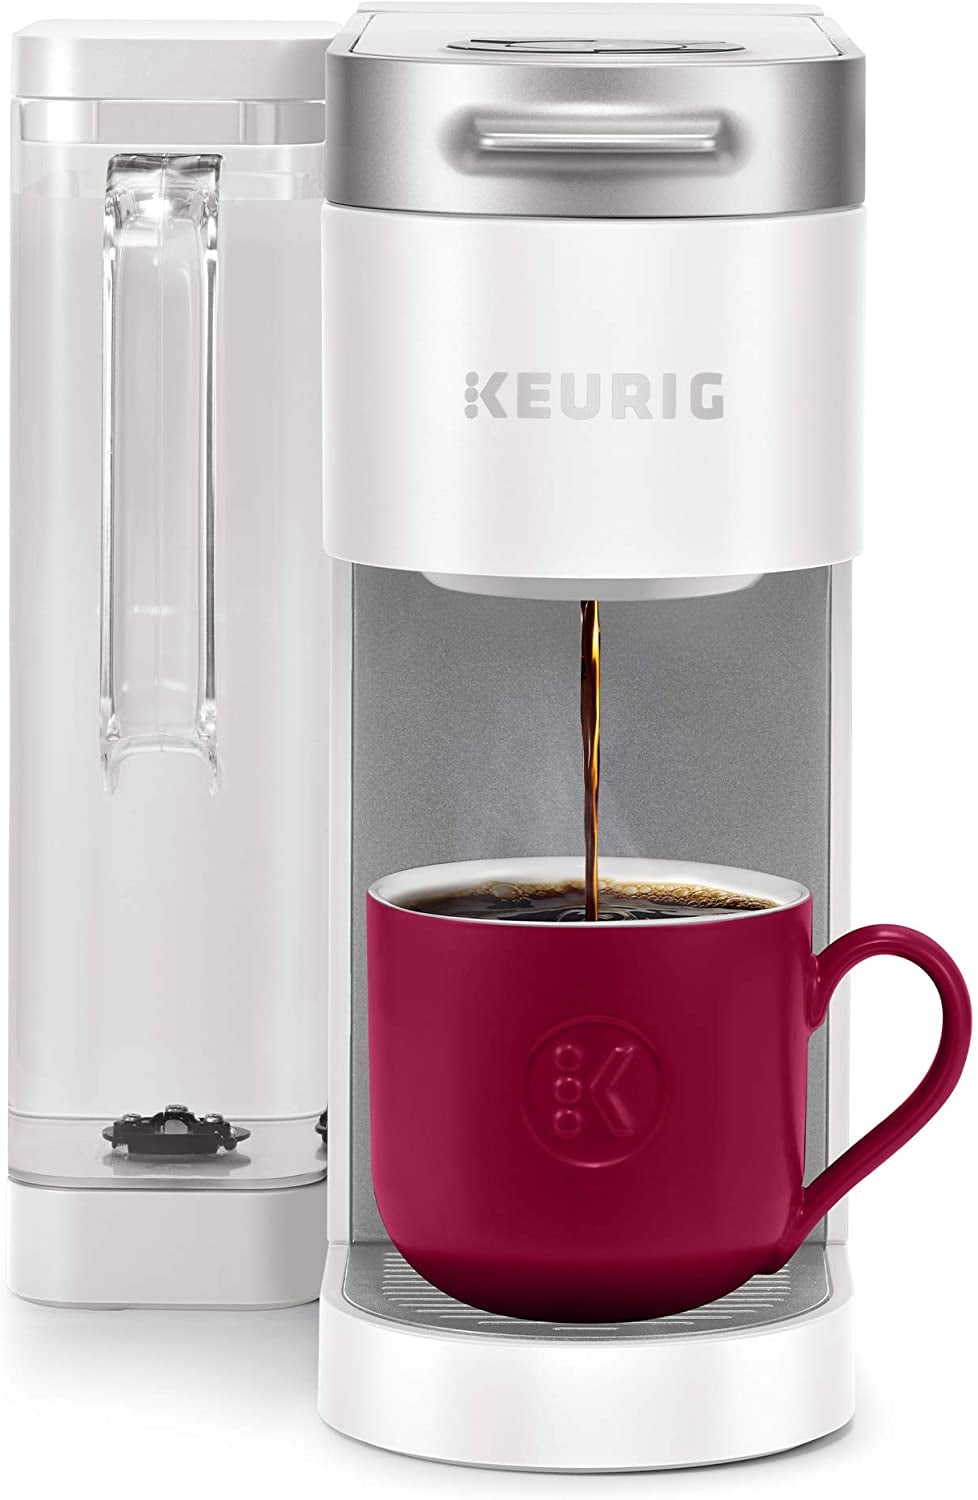 Brighten Your Mornings with the Keurig Mini Plus Coffee Brewer